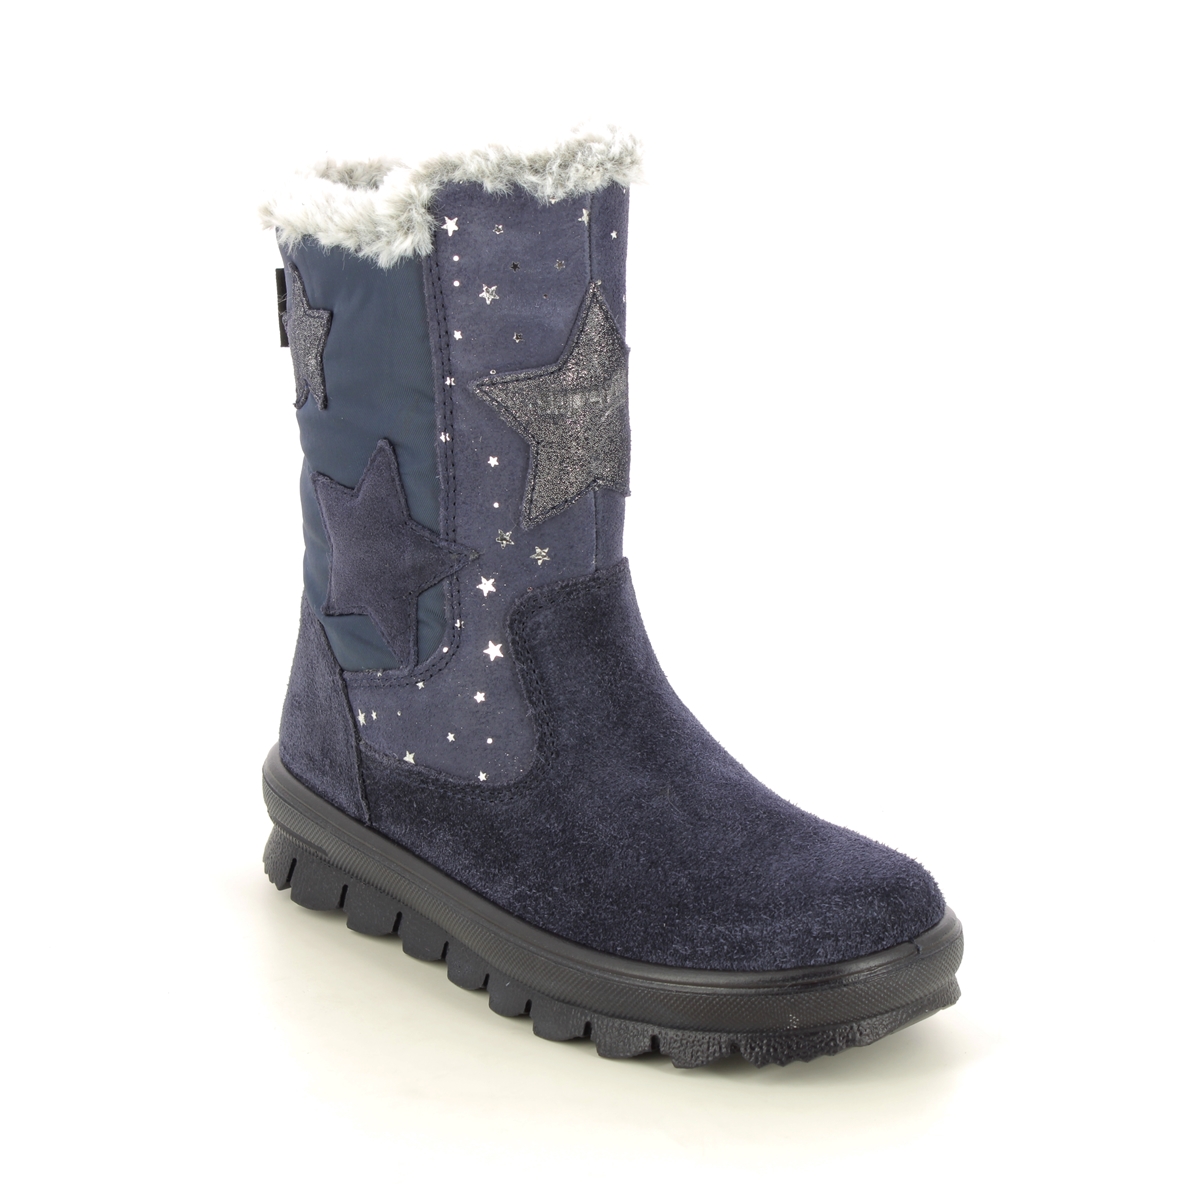 Superfit Flavia Star Gtx Navy Suede Kids Girls Boots 1000219-8000 In Size 34 In Plain Navy Suede For kids